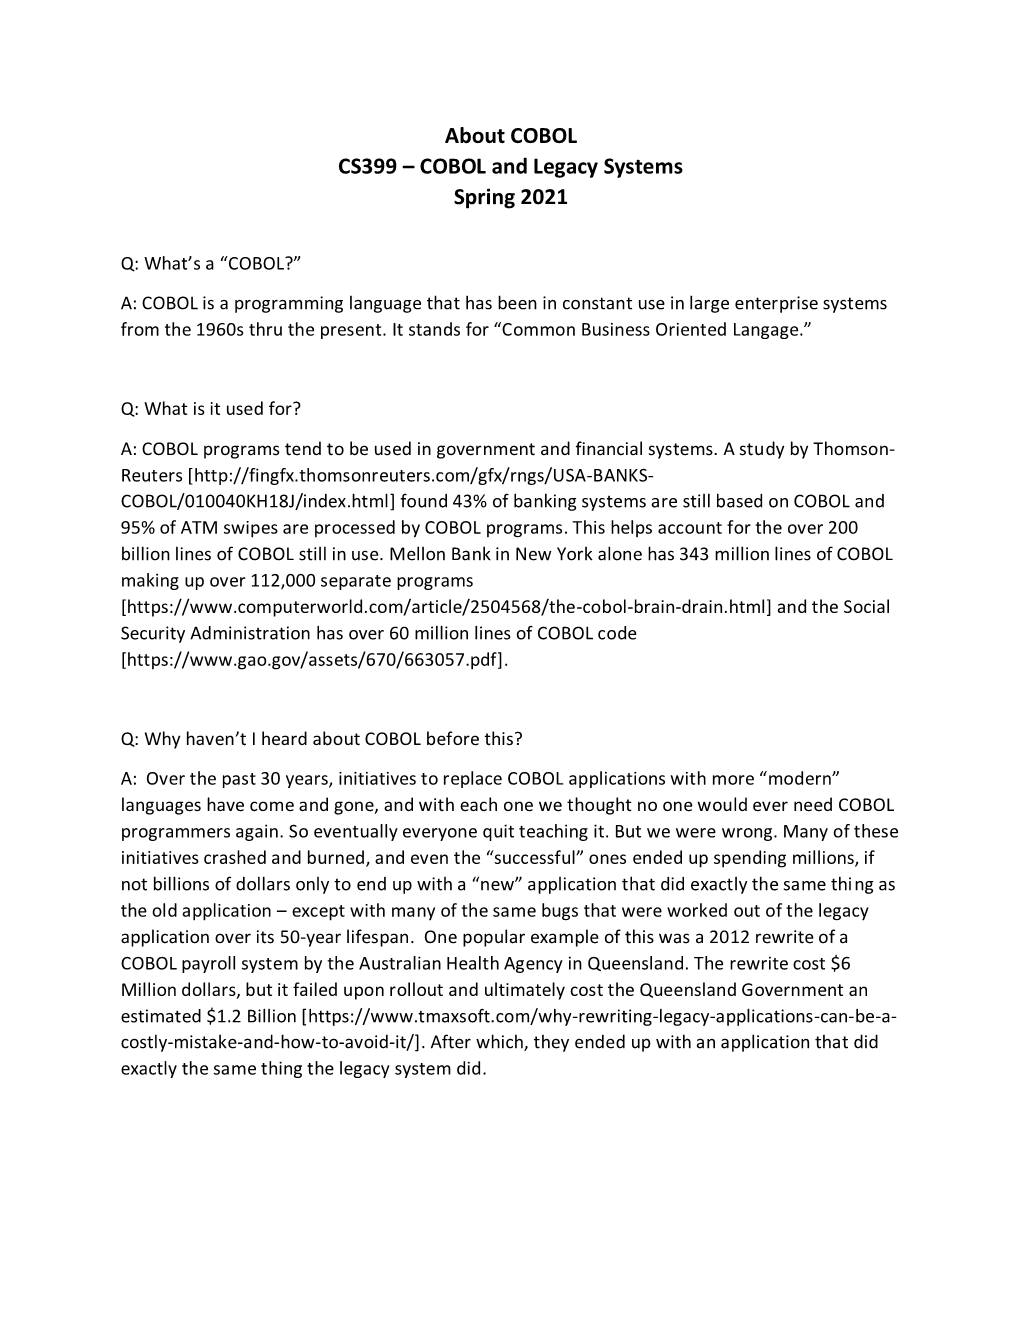 About COBOL CS399 – COBOL and Legacy Systems Spring 2021